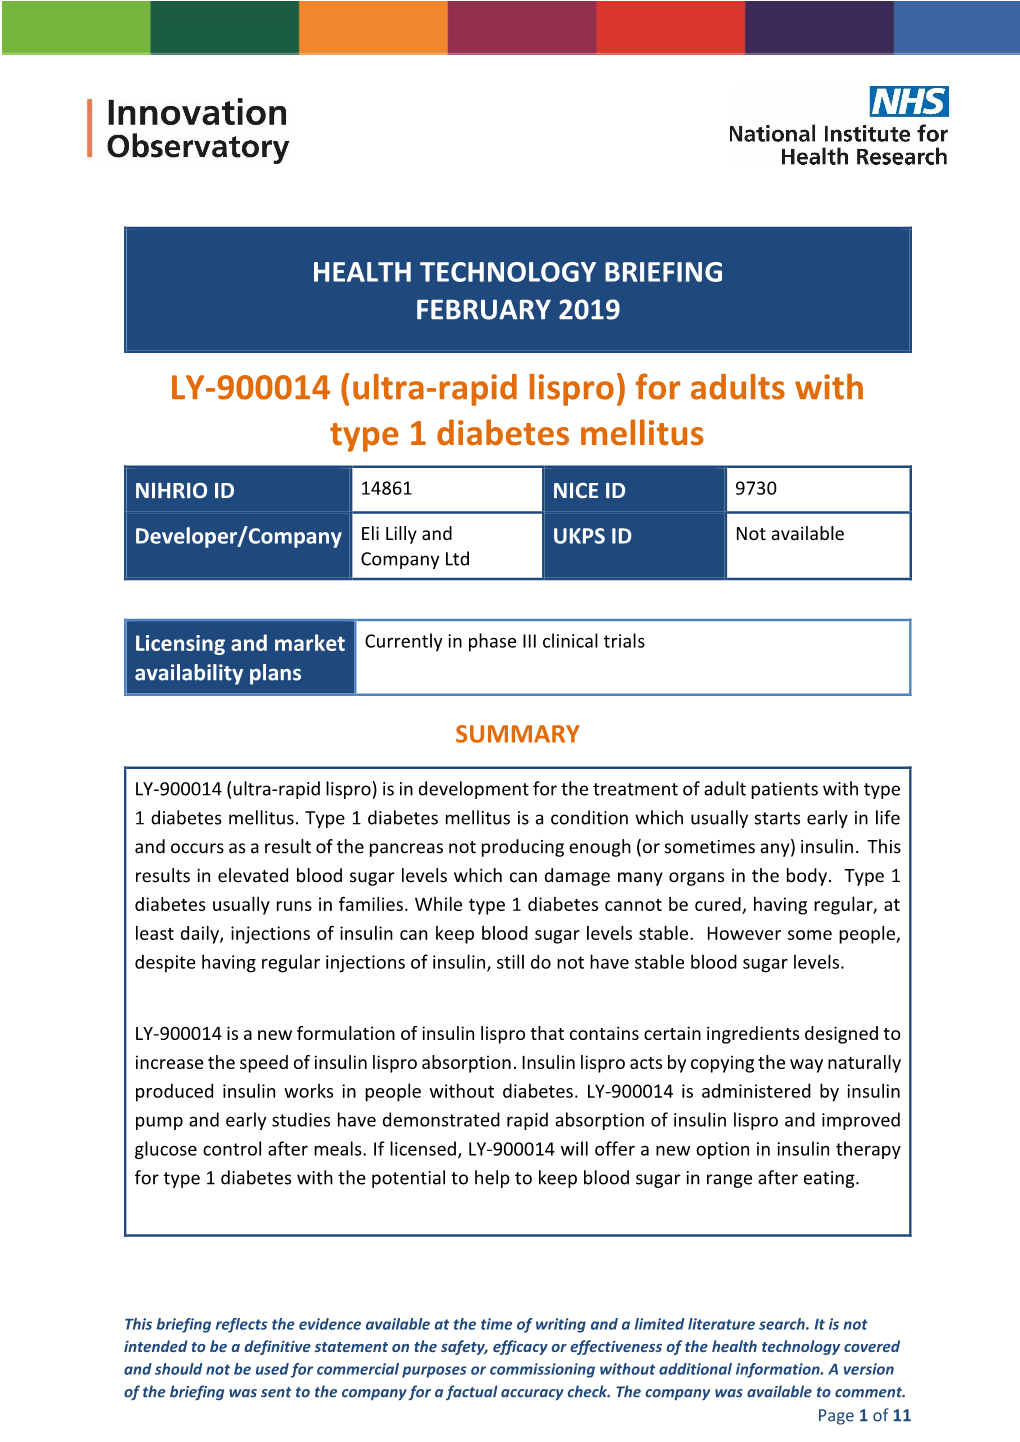 LY-900014 (Ultra-Rapid Lispro) for Adults with Type 1 Diabetes Mellitus